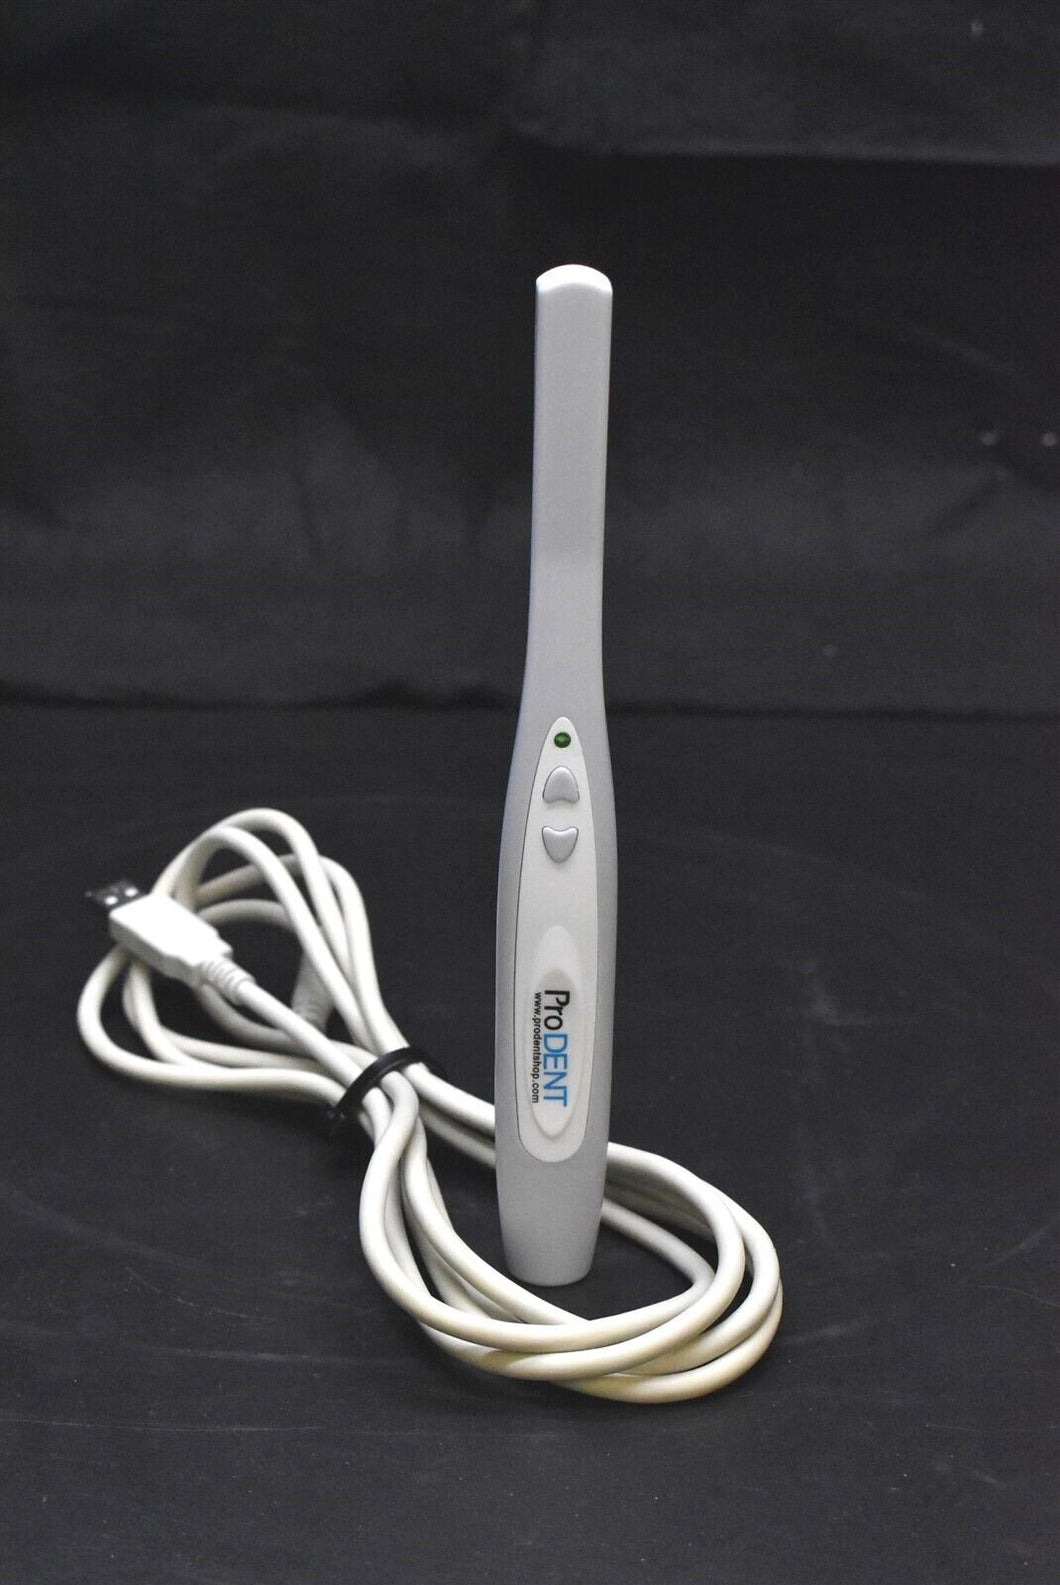 ProDent PD-740 Dental Intraoral Camera Intra Oral Imaging Unit - SOLD AS-IS